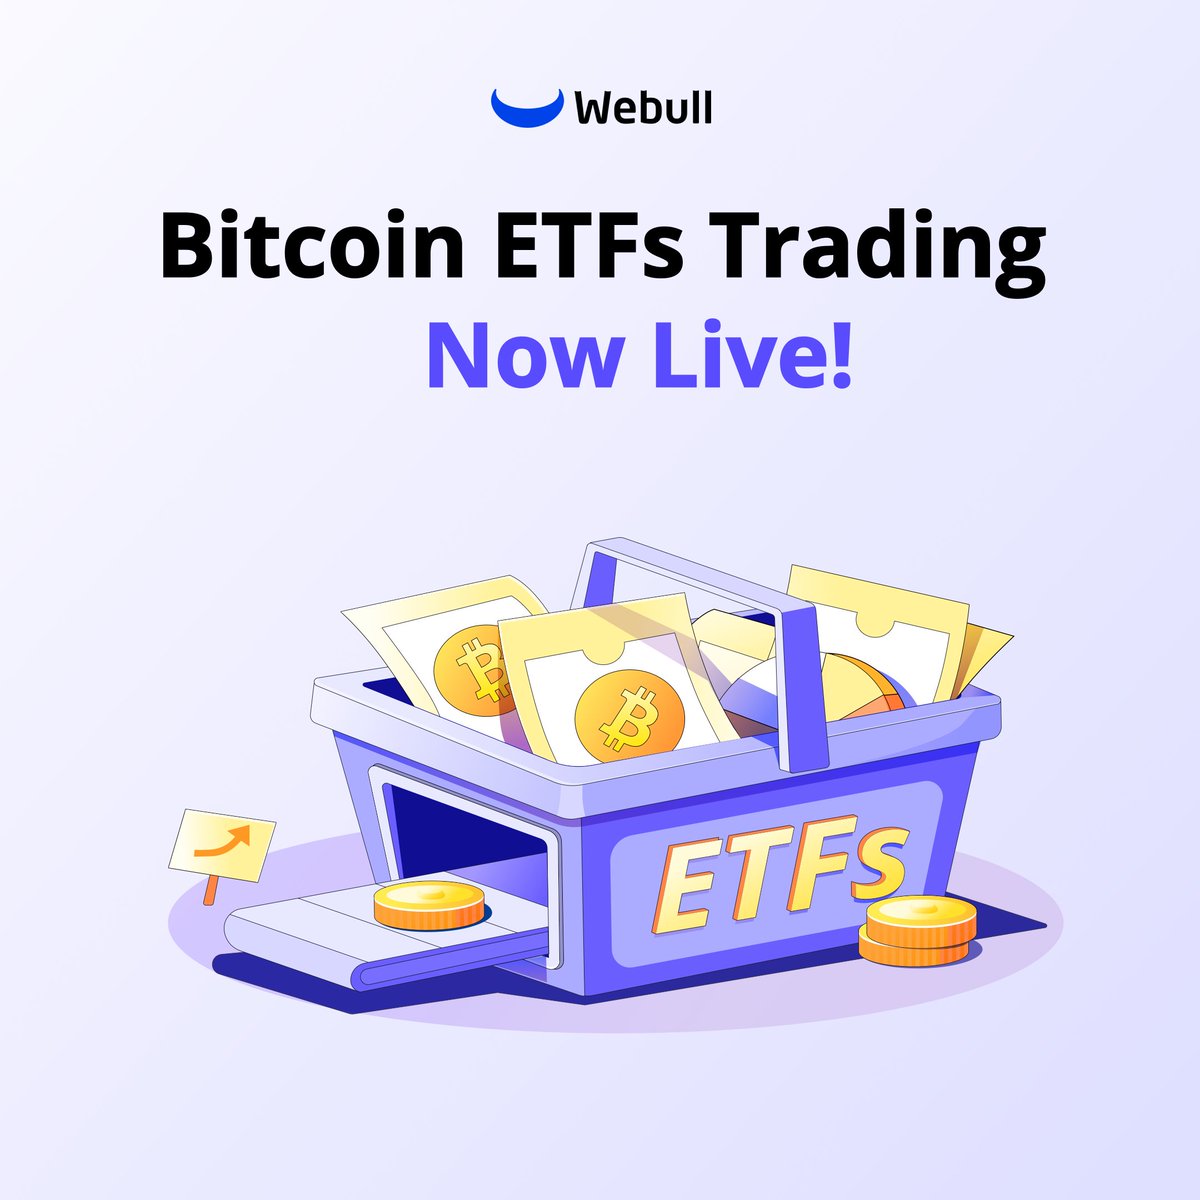 🚀 Great News! The long-anticipated Bitcoin ETFs have arrived! 🌕 You can now gain direct exposure to spot Bitcoin in mainstream financial markets! 💰 Get exposure to Bitcoin through low-cost ETFs! 🌟Click the link below to learn what the options are and get started.…